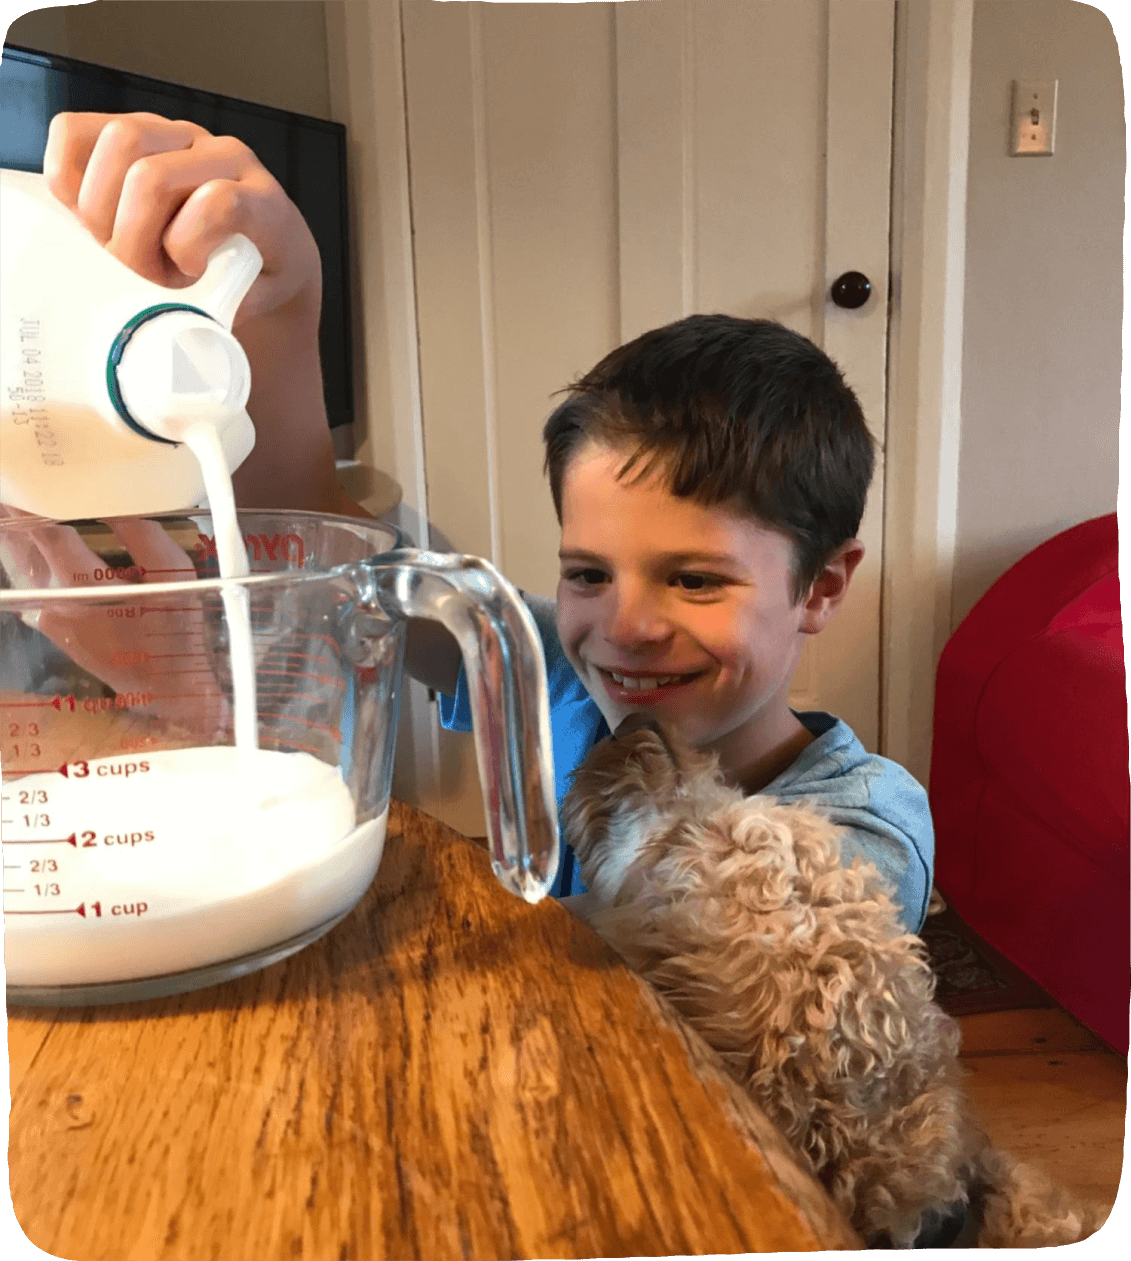 Child pours milk into a large measuring cup